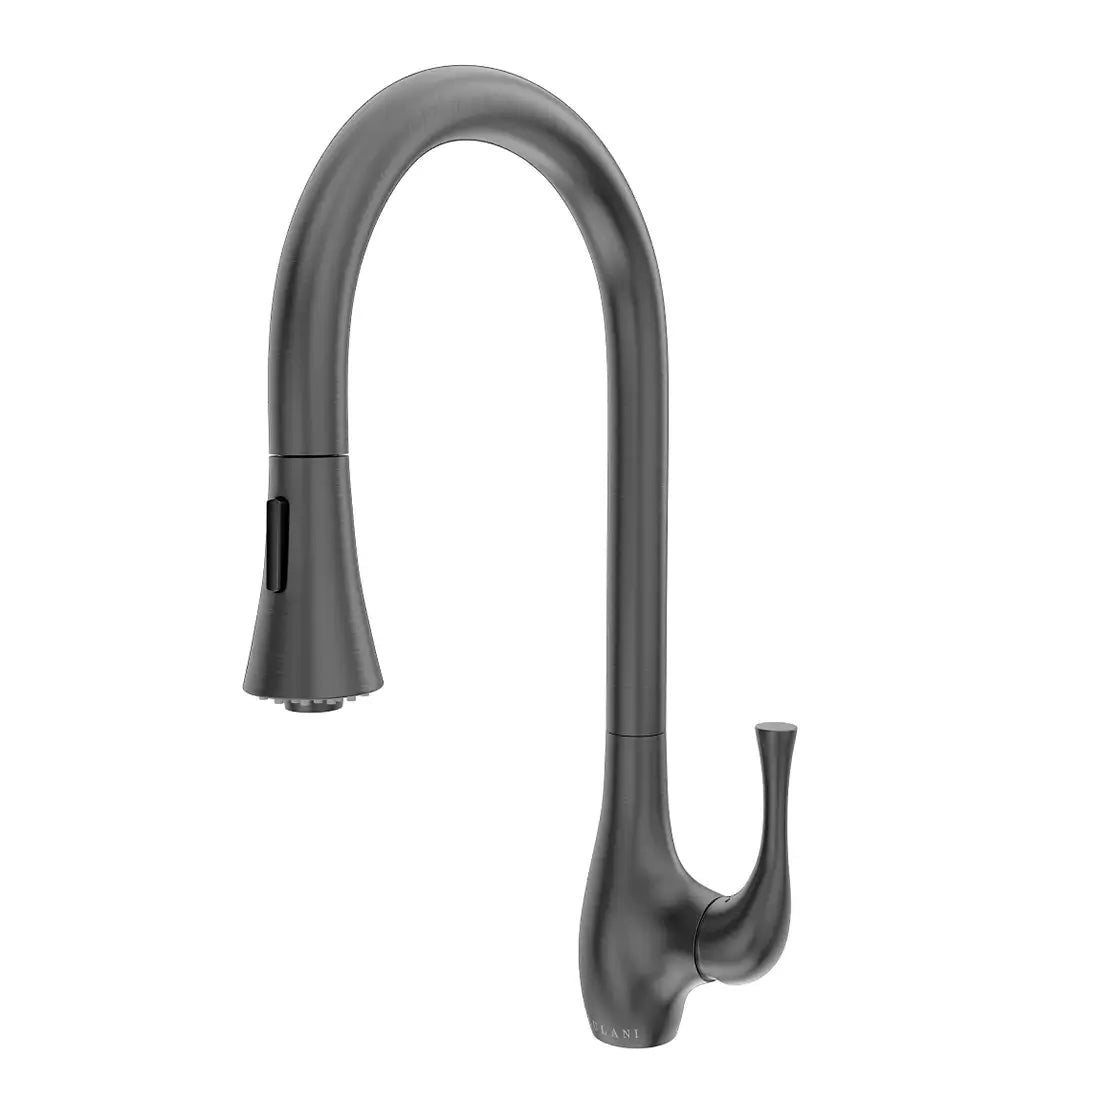 Yasawa Stainless Steel 1 Handle Pull-Down Swivel Kitchen Faucet Includes Baseplate